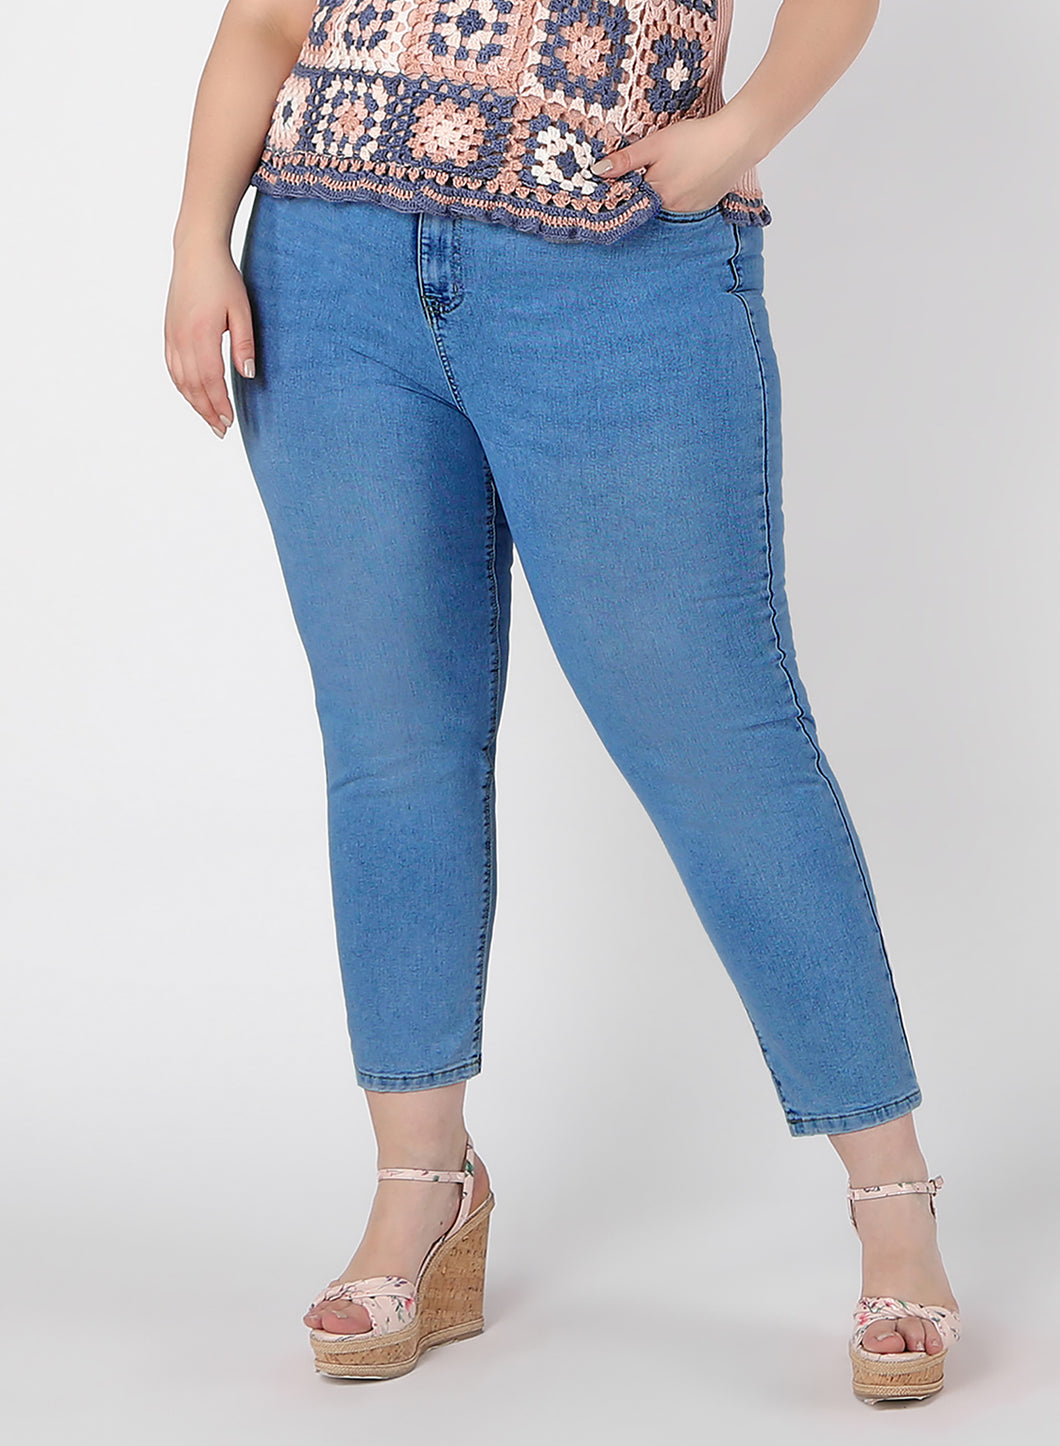 HIGH RISE STRAIGHT LEG JEAN by Dex (available in plus sizes)